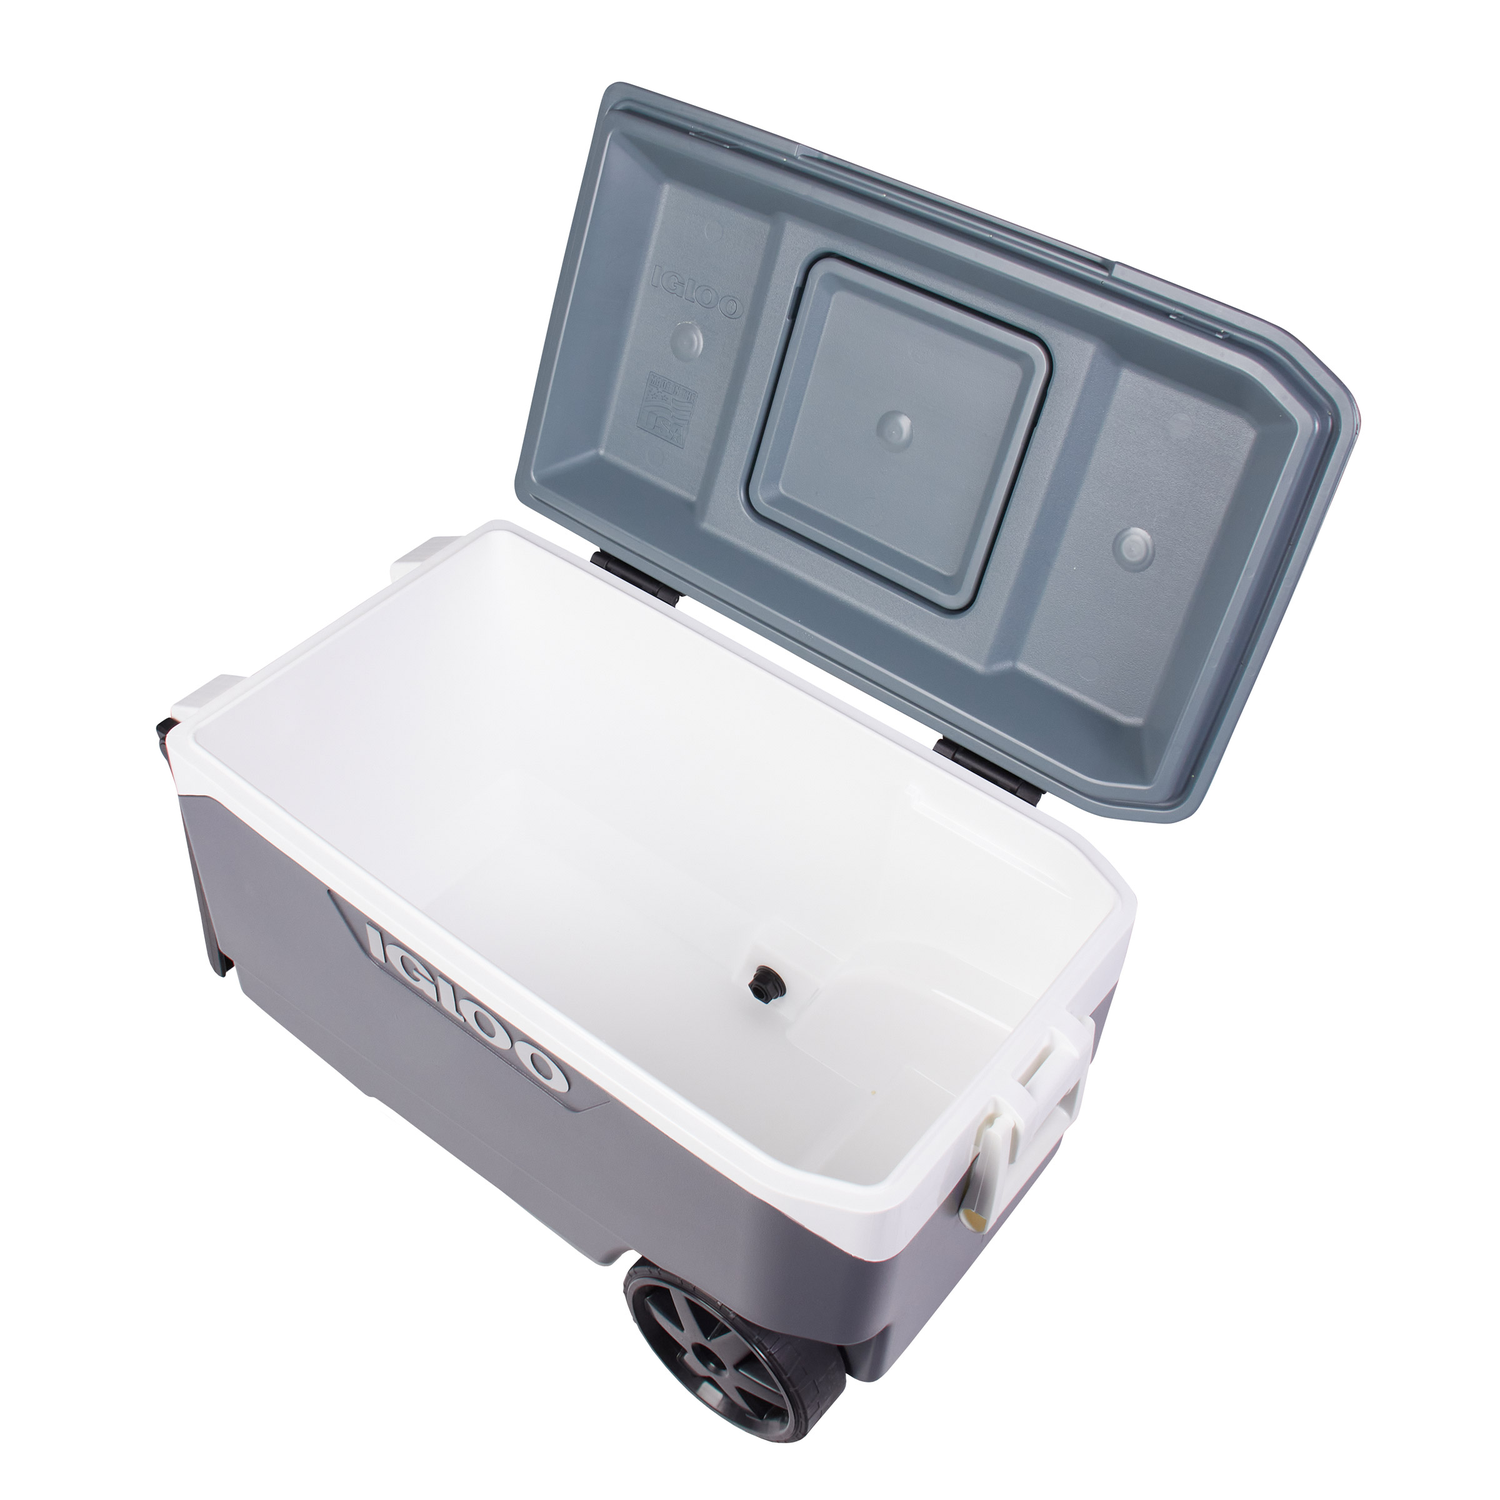 Igloo Maxcold Latitude Flip And Tow Wheeled Cooler - 90-quart HOG-Home Office Garden online marketplace.